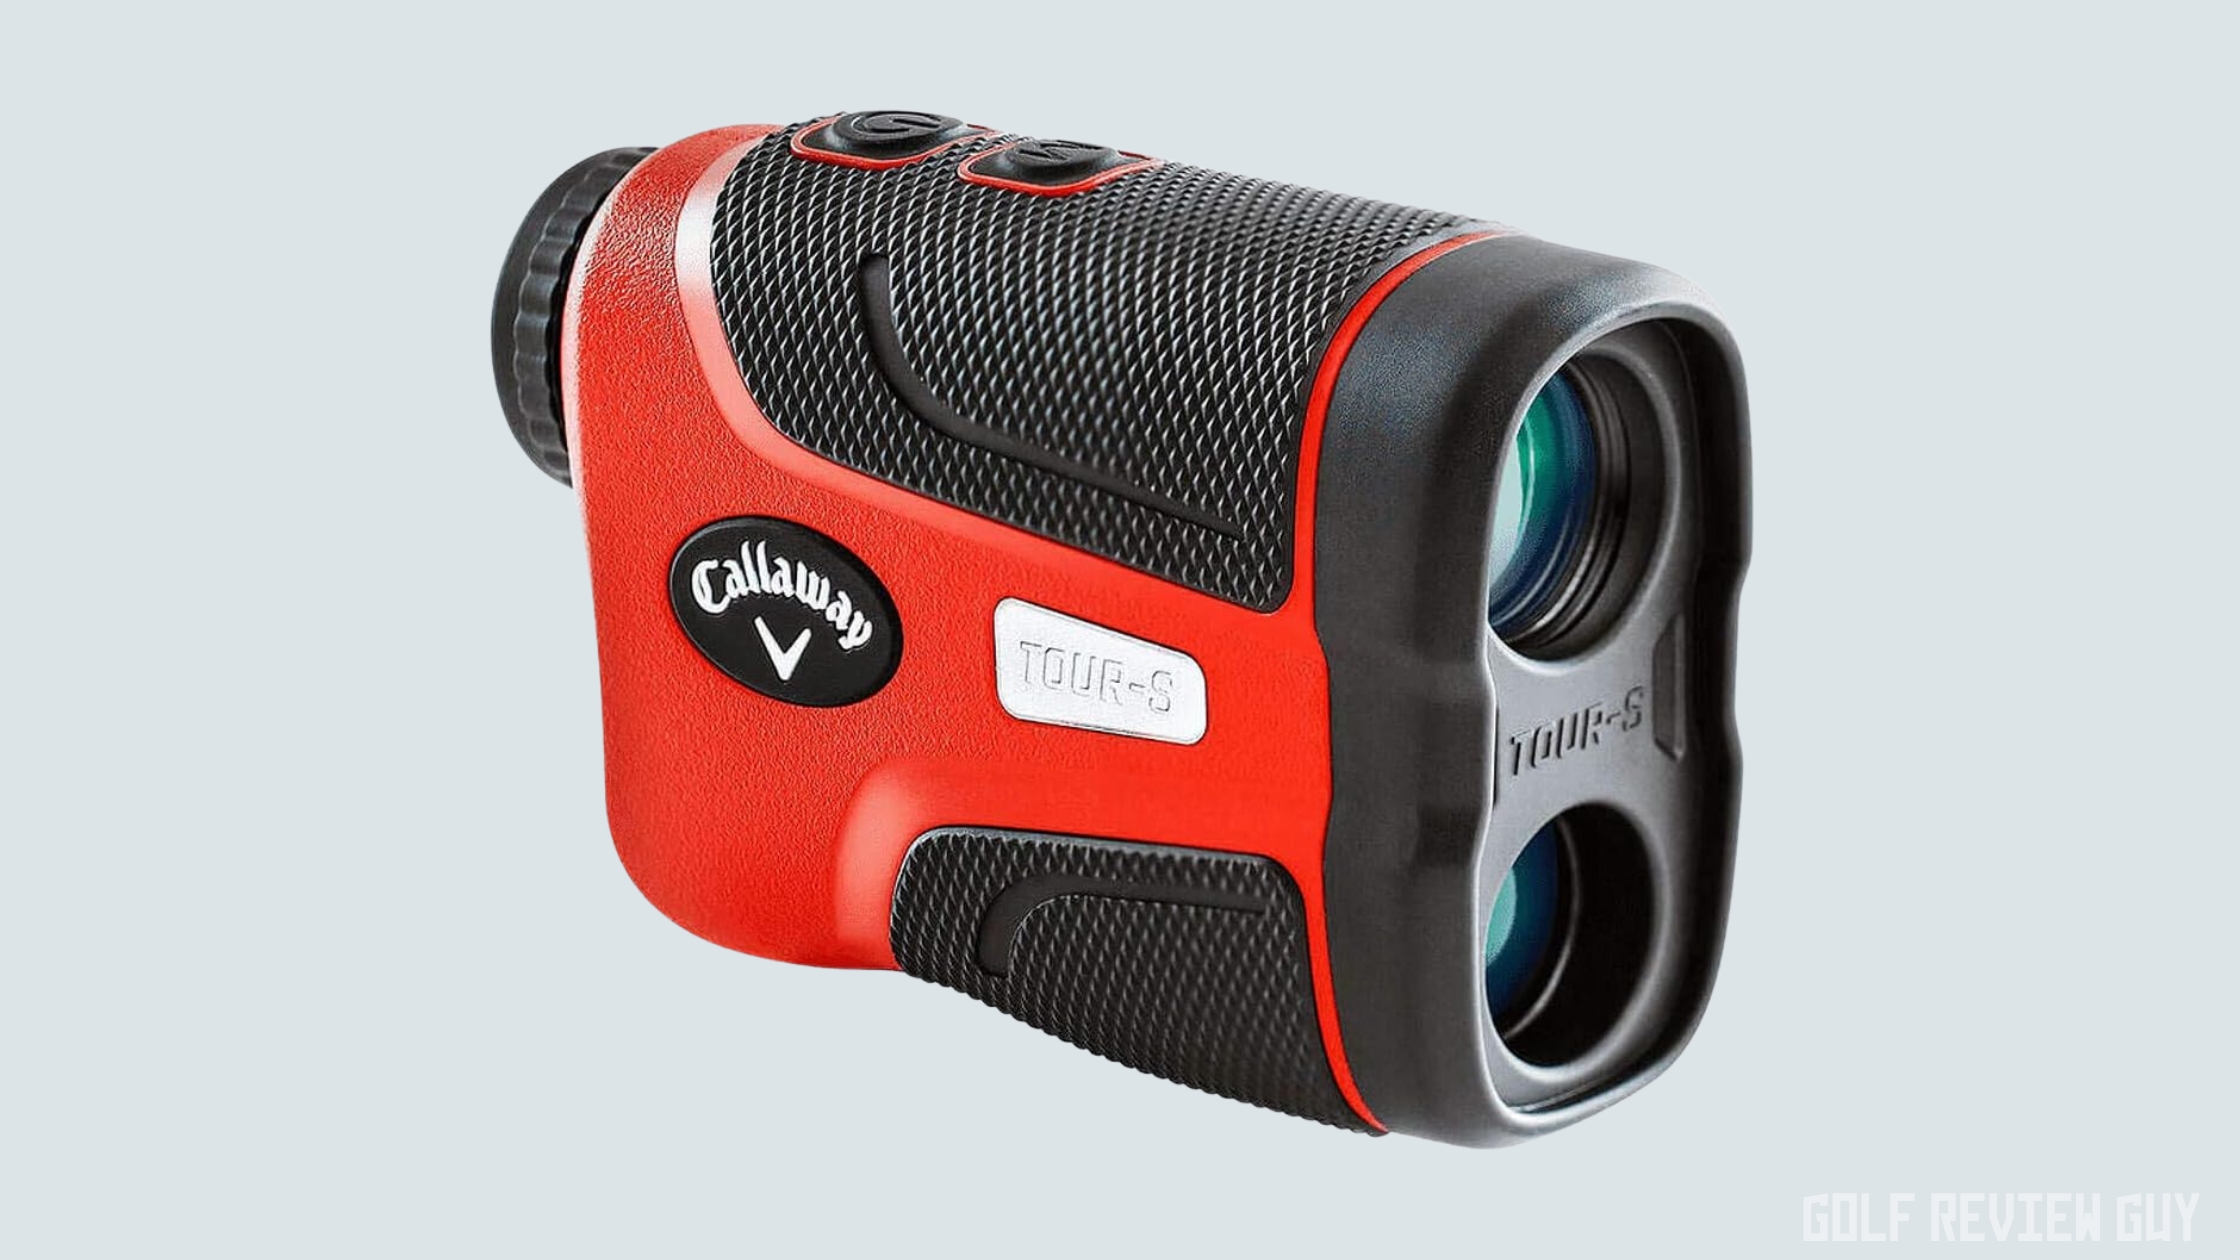 Callaway Tour S Laser Rangefinder Review - Golf Review Guy